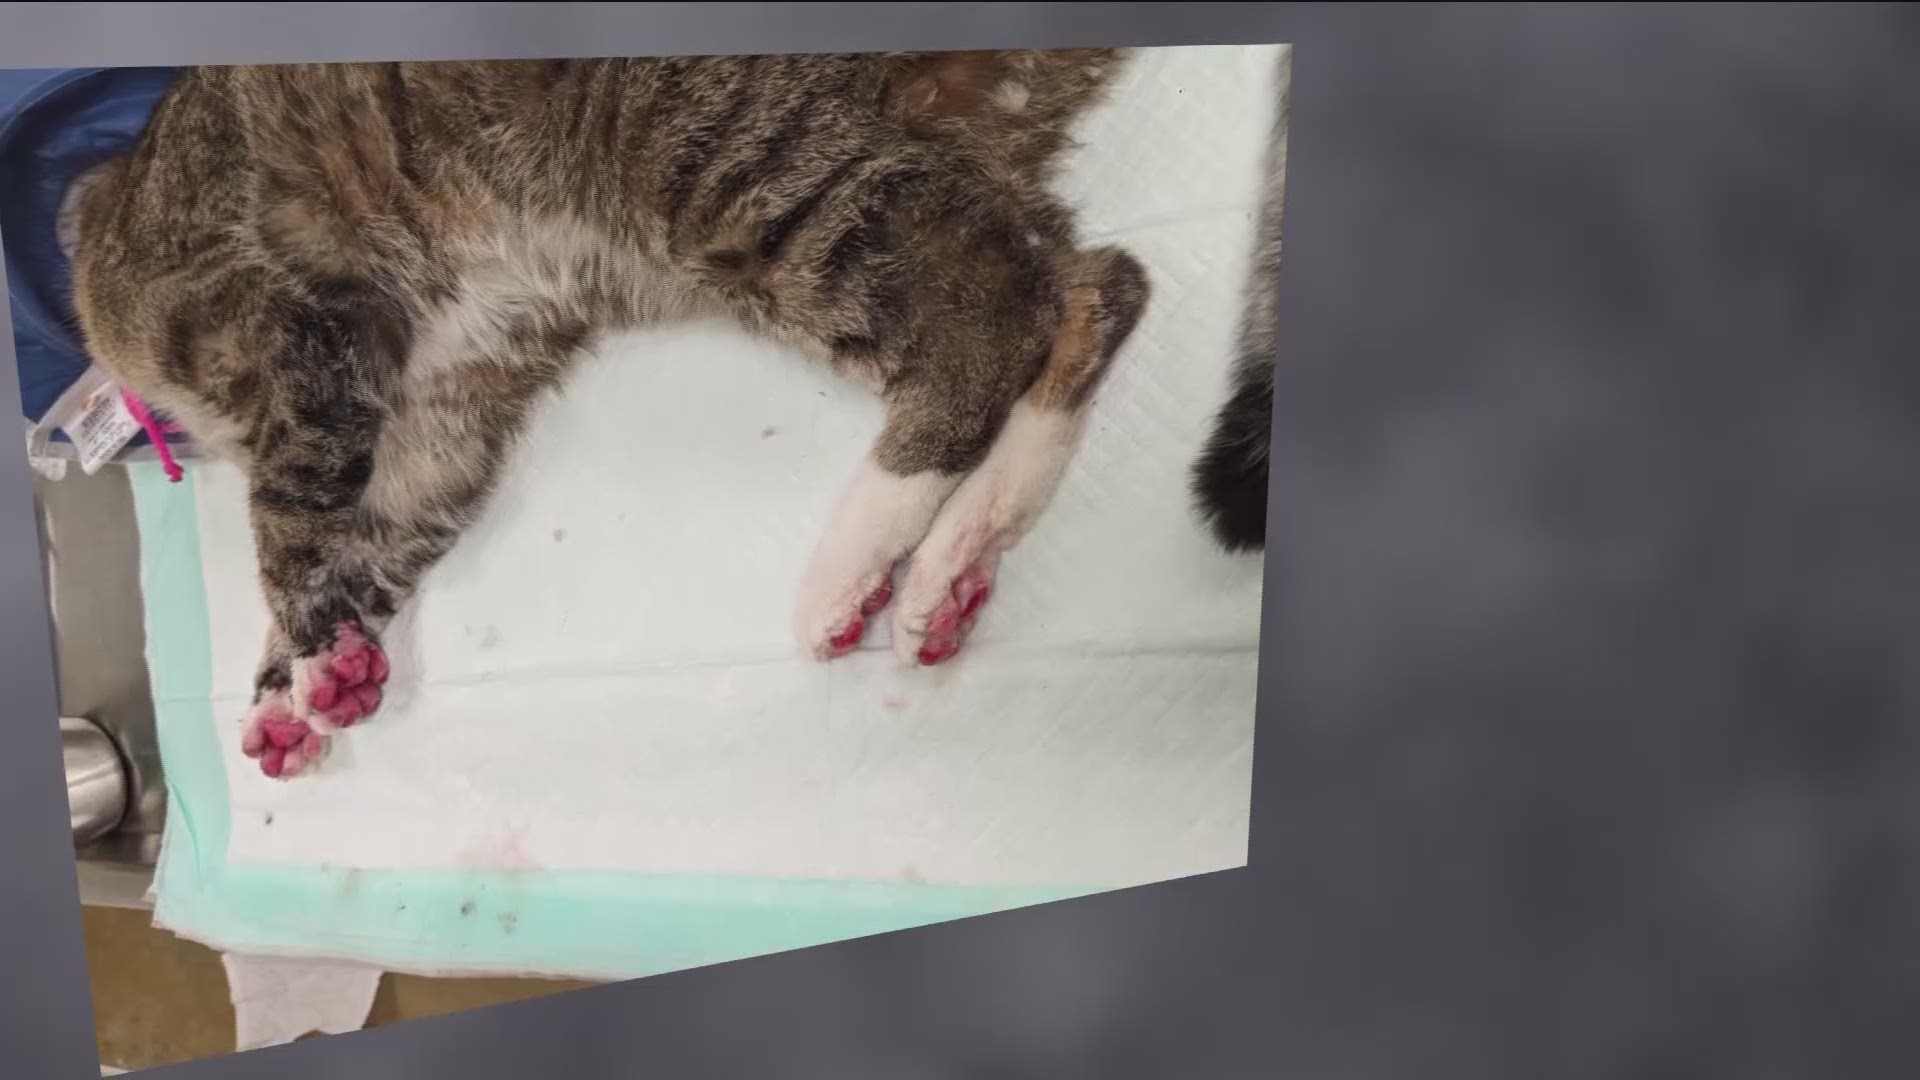 1-year-old Zeke was brought into the Animal Humane Society with severe frostbite around Christmas. More than six weeks later, doctors say he is still recovering.